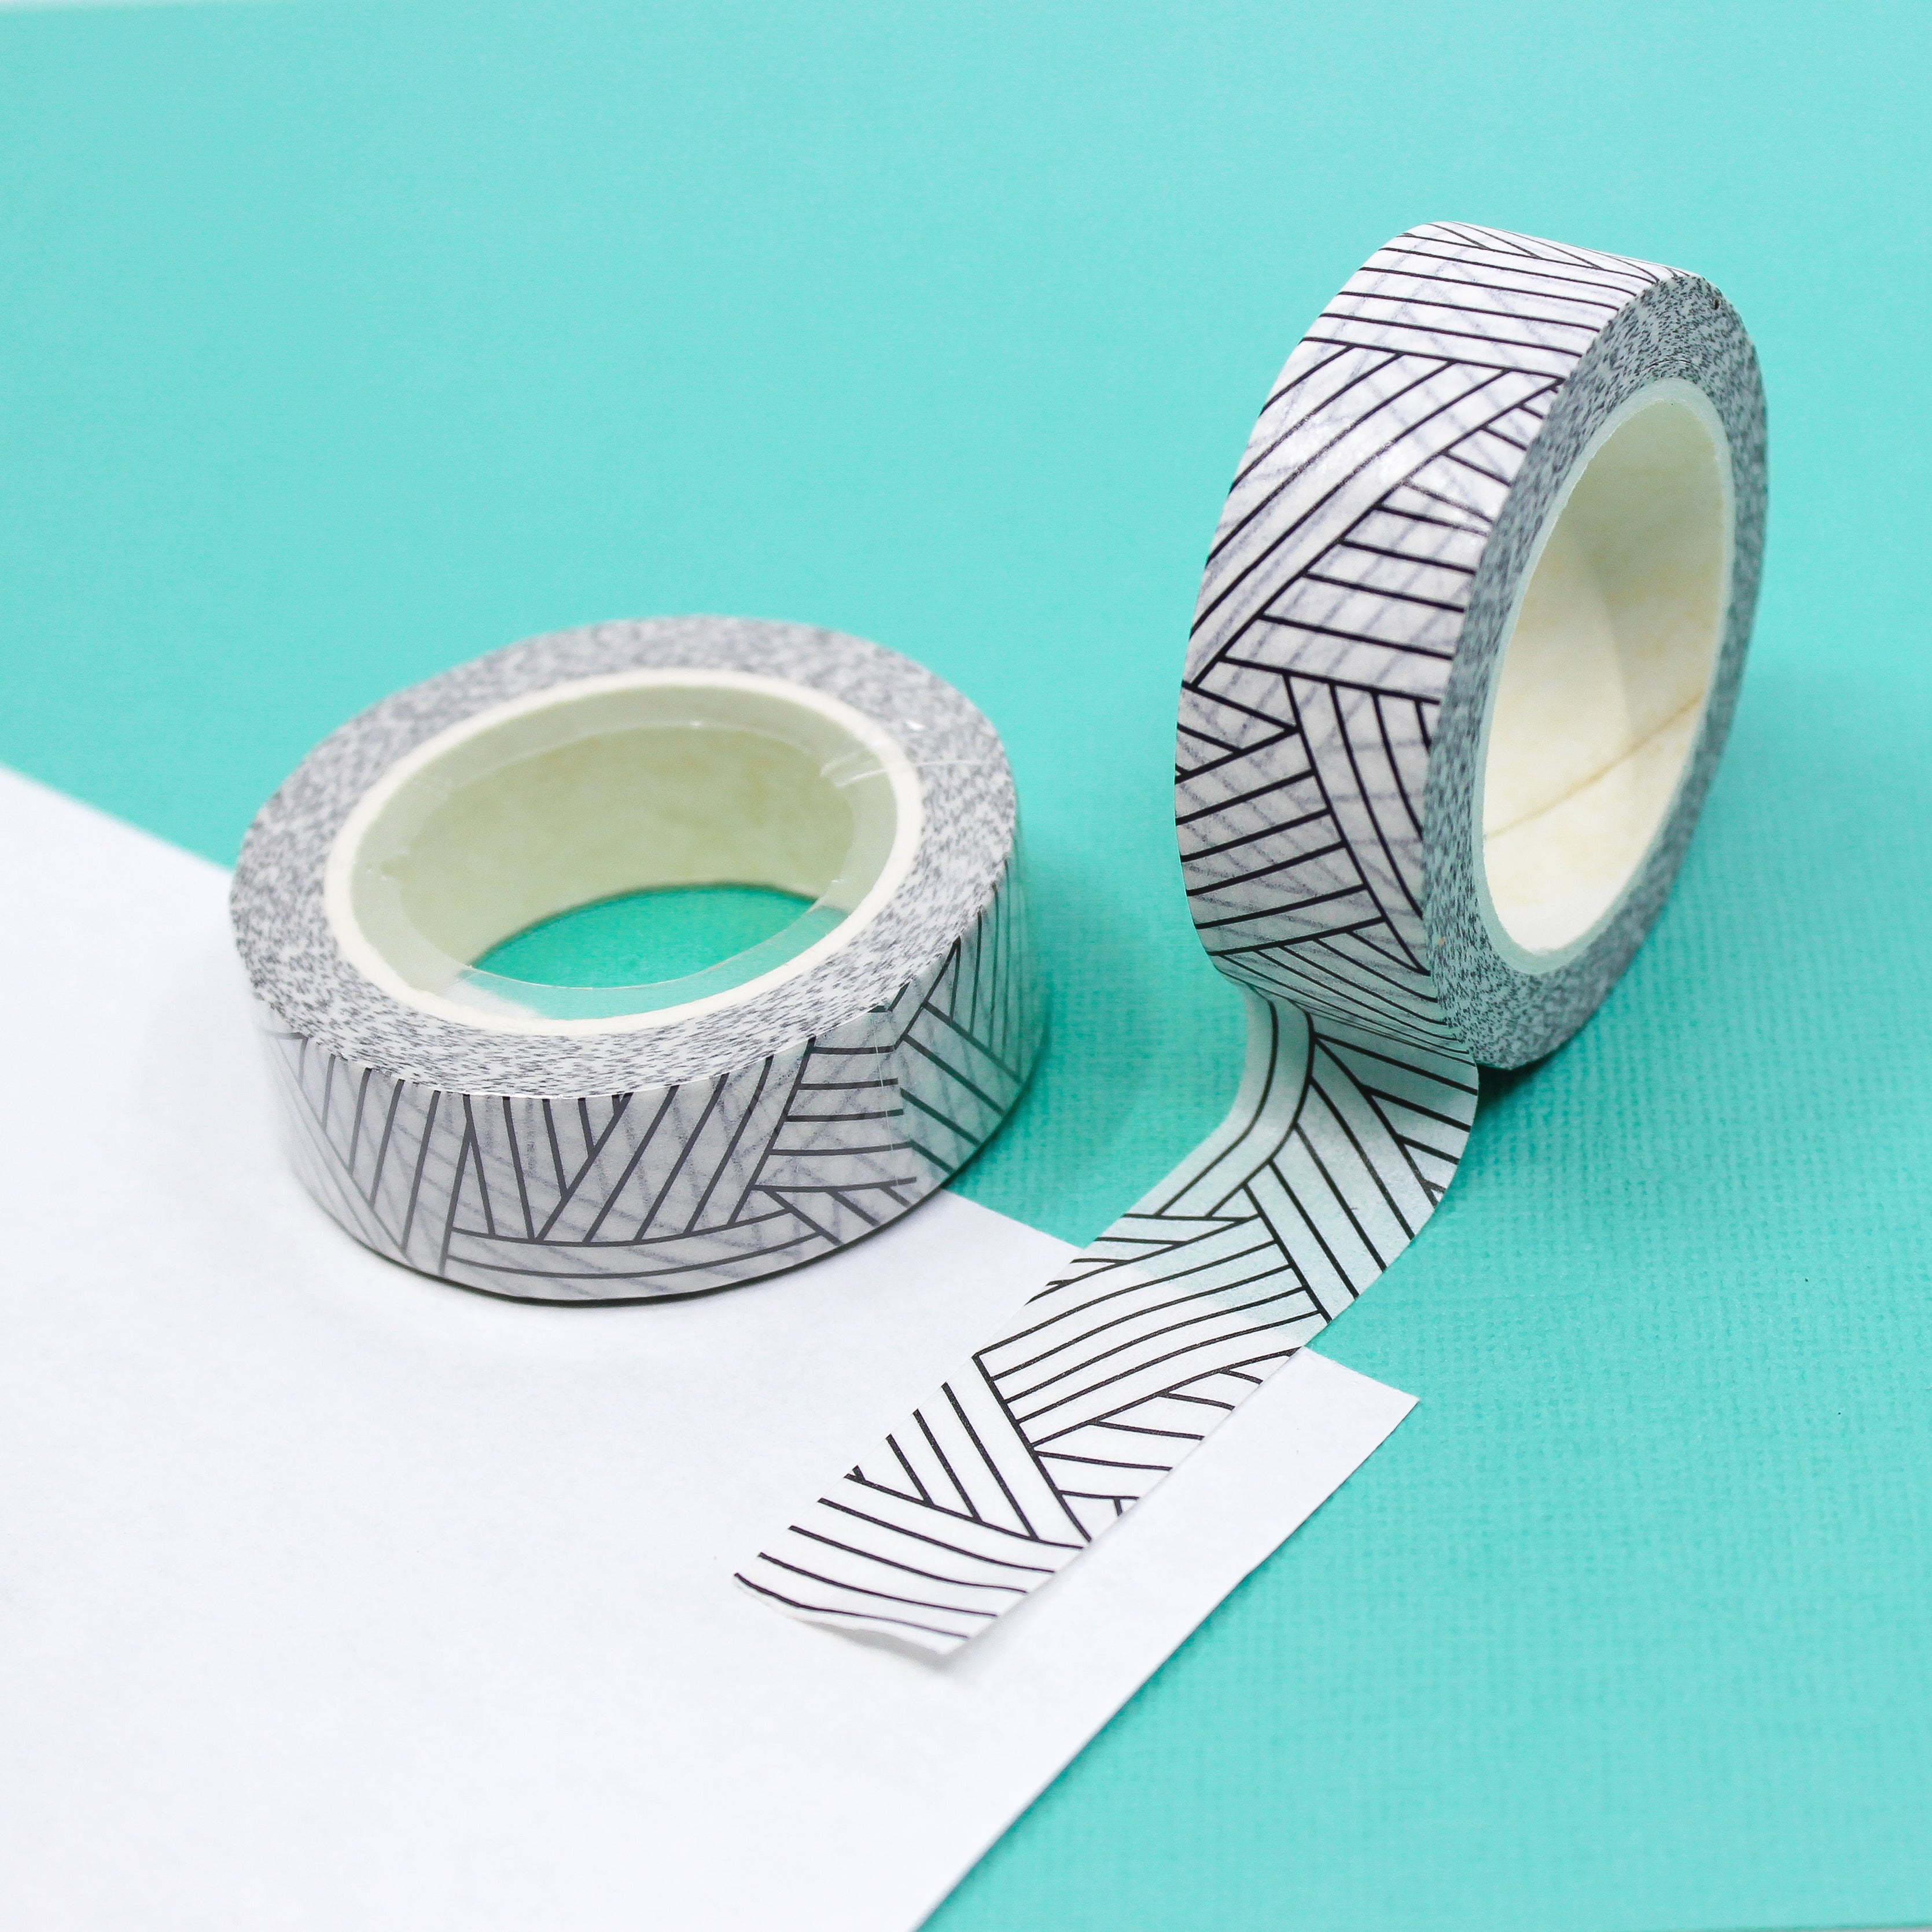 This is a black and white mummy wrap pattern view themed washi tape from BBB Supplies Craft Shop